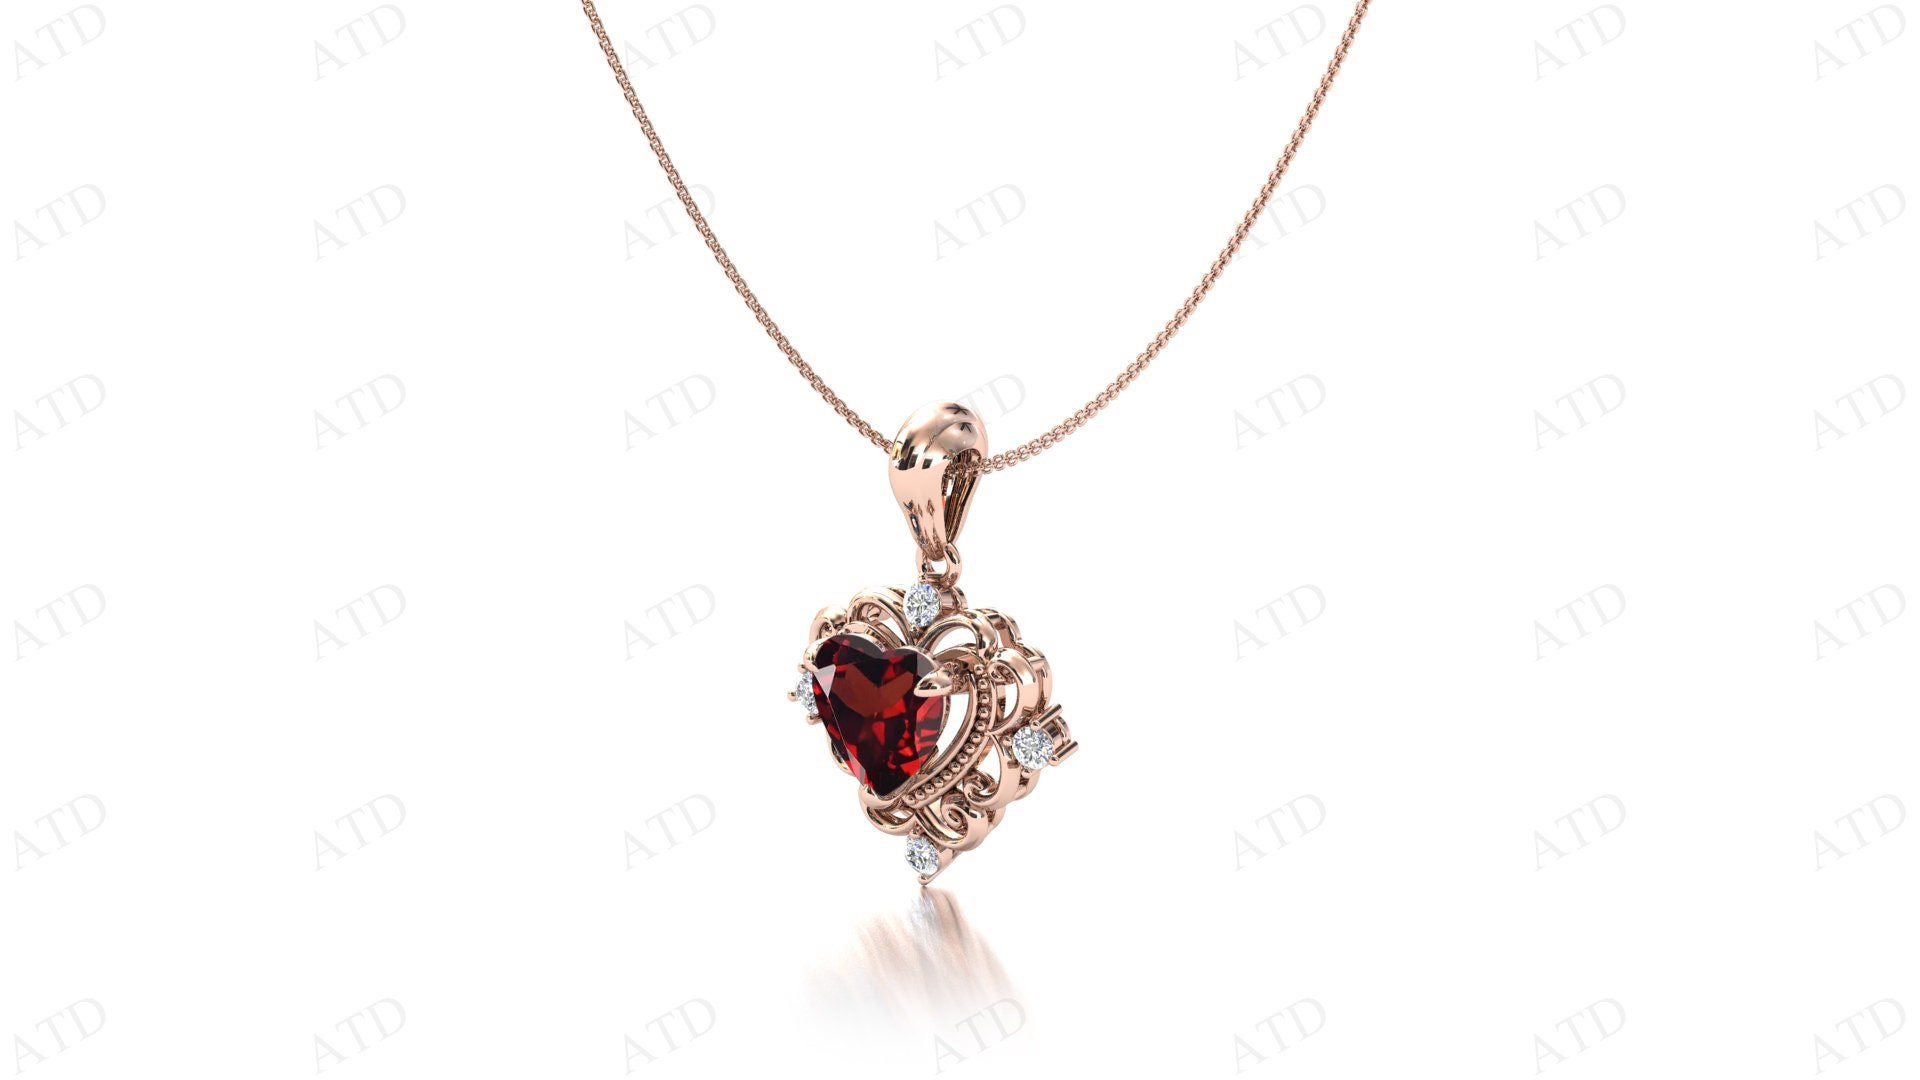 Buy SURATDIAMOND Heart Shaped Red Garnet 925 Sterling-Silver Pendant for  Girls at Amazon.in